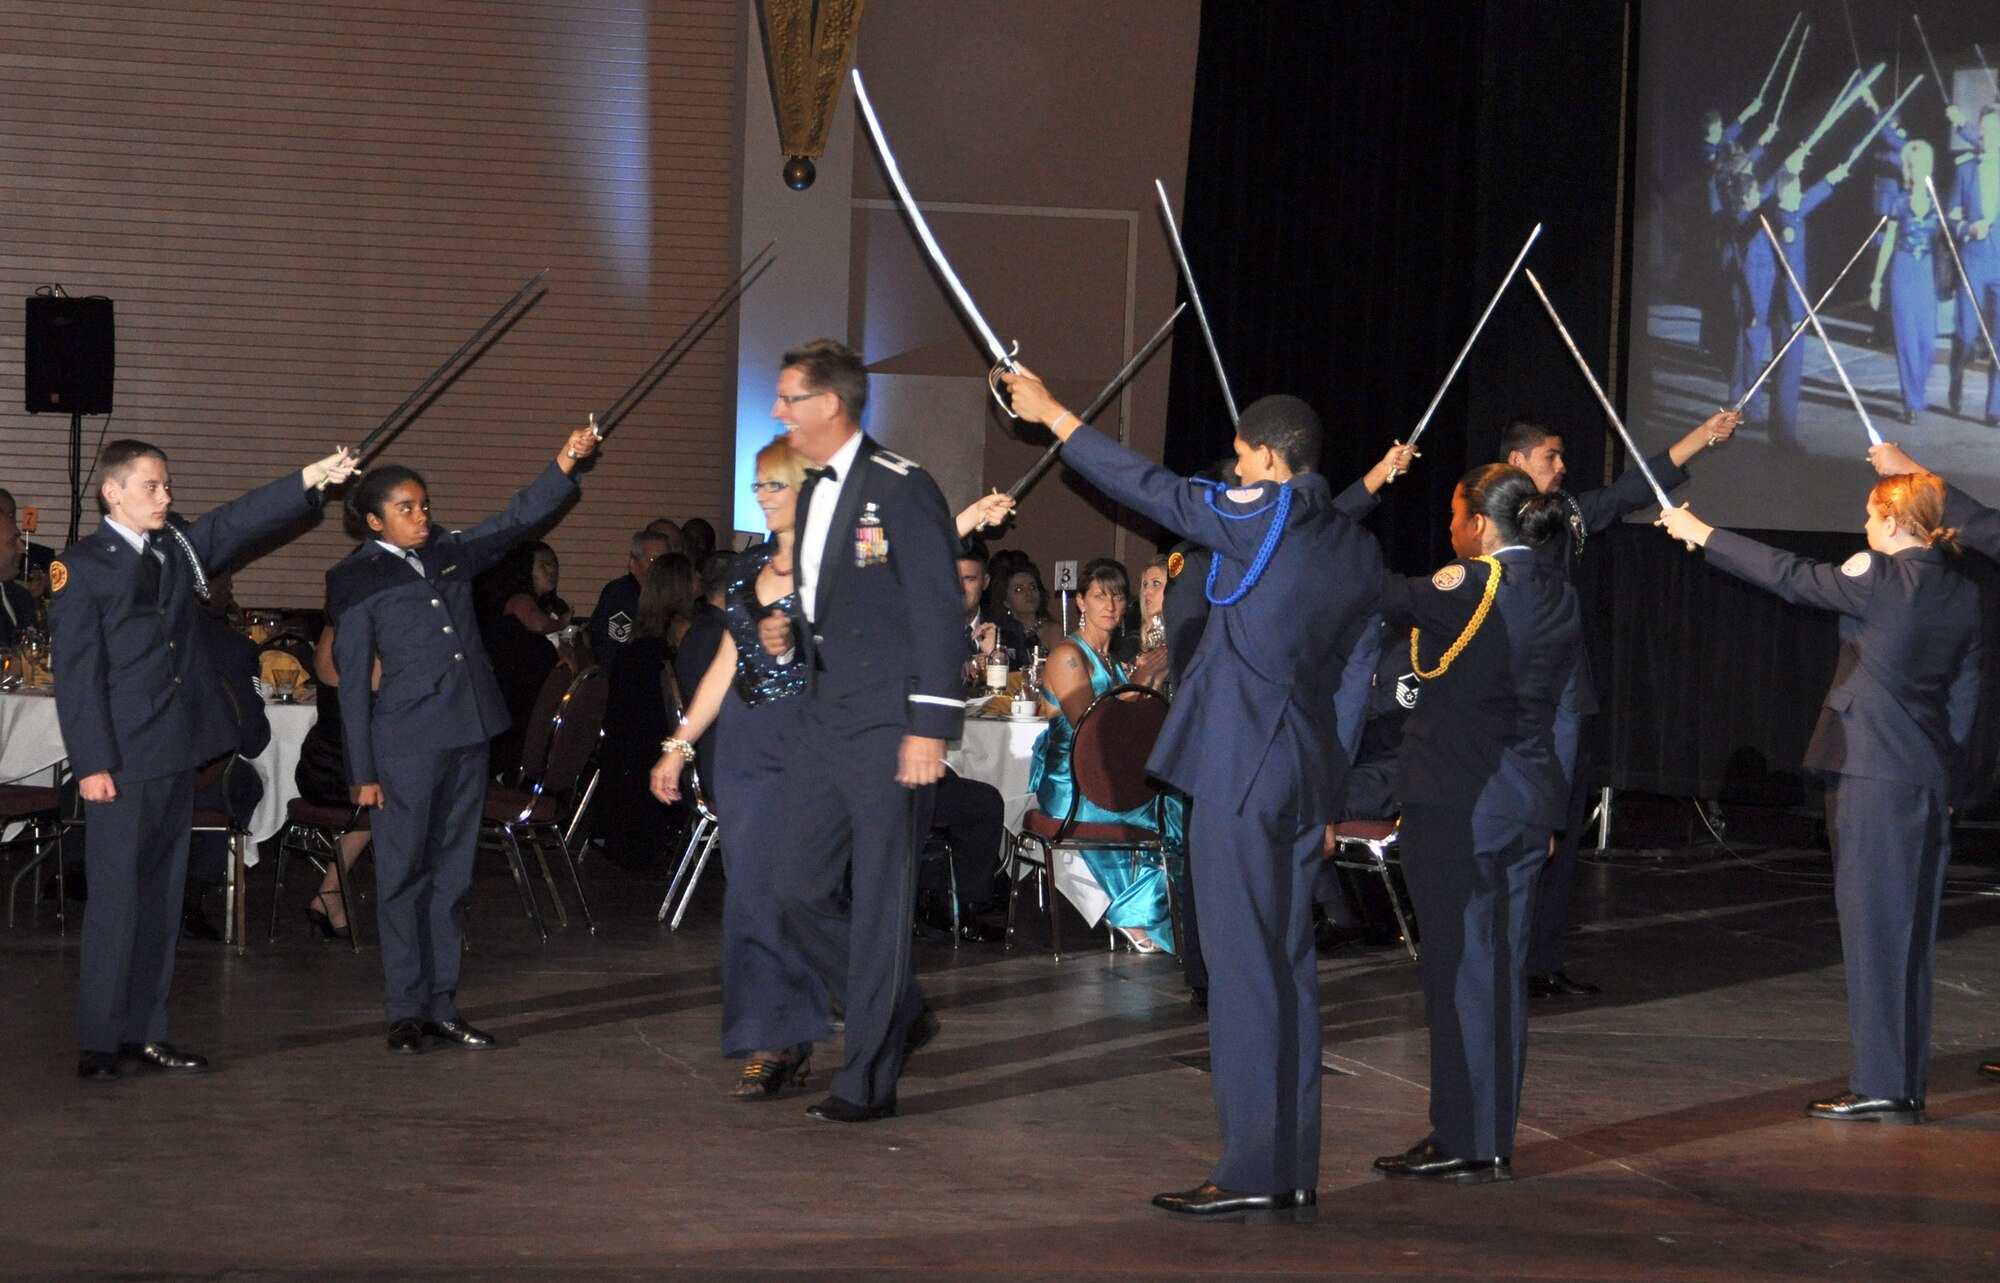 "Over There: March ARB Deployed" was the theme of this year's Military Ball at Raincross Square Riverside Convention Center.  (U.S. Air Force photo/Master Sgt. Michael Blair)